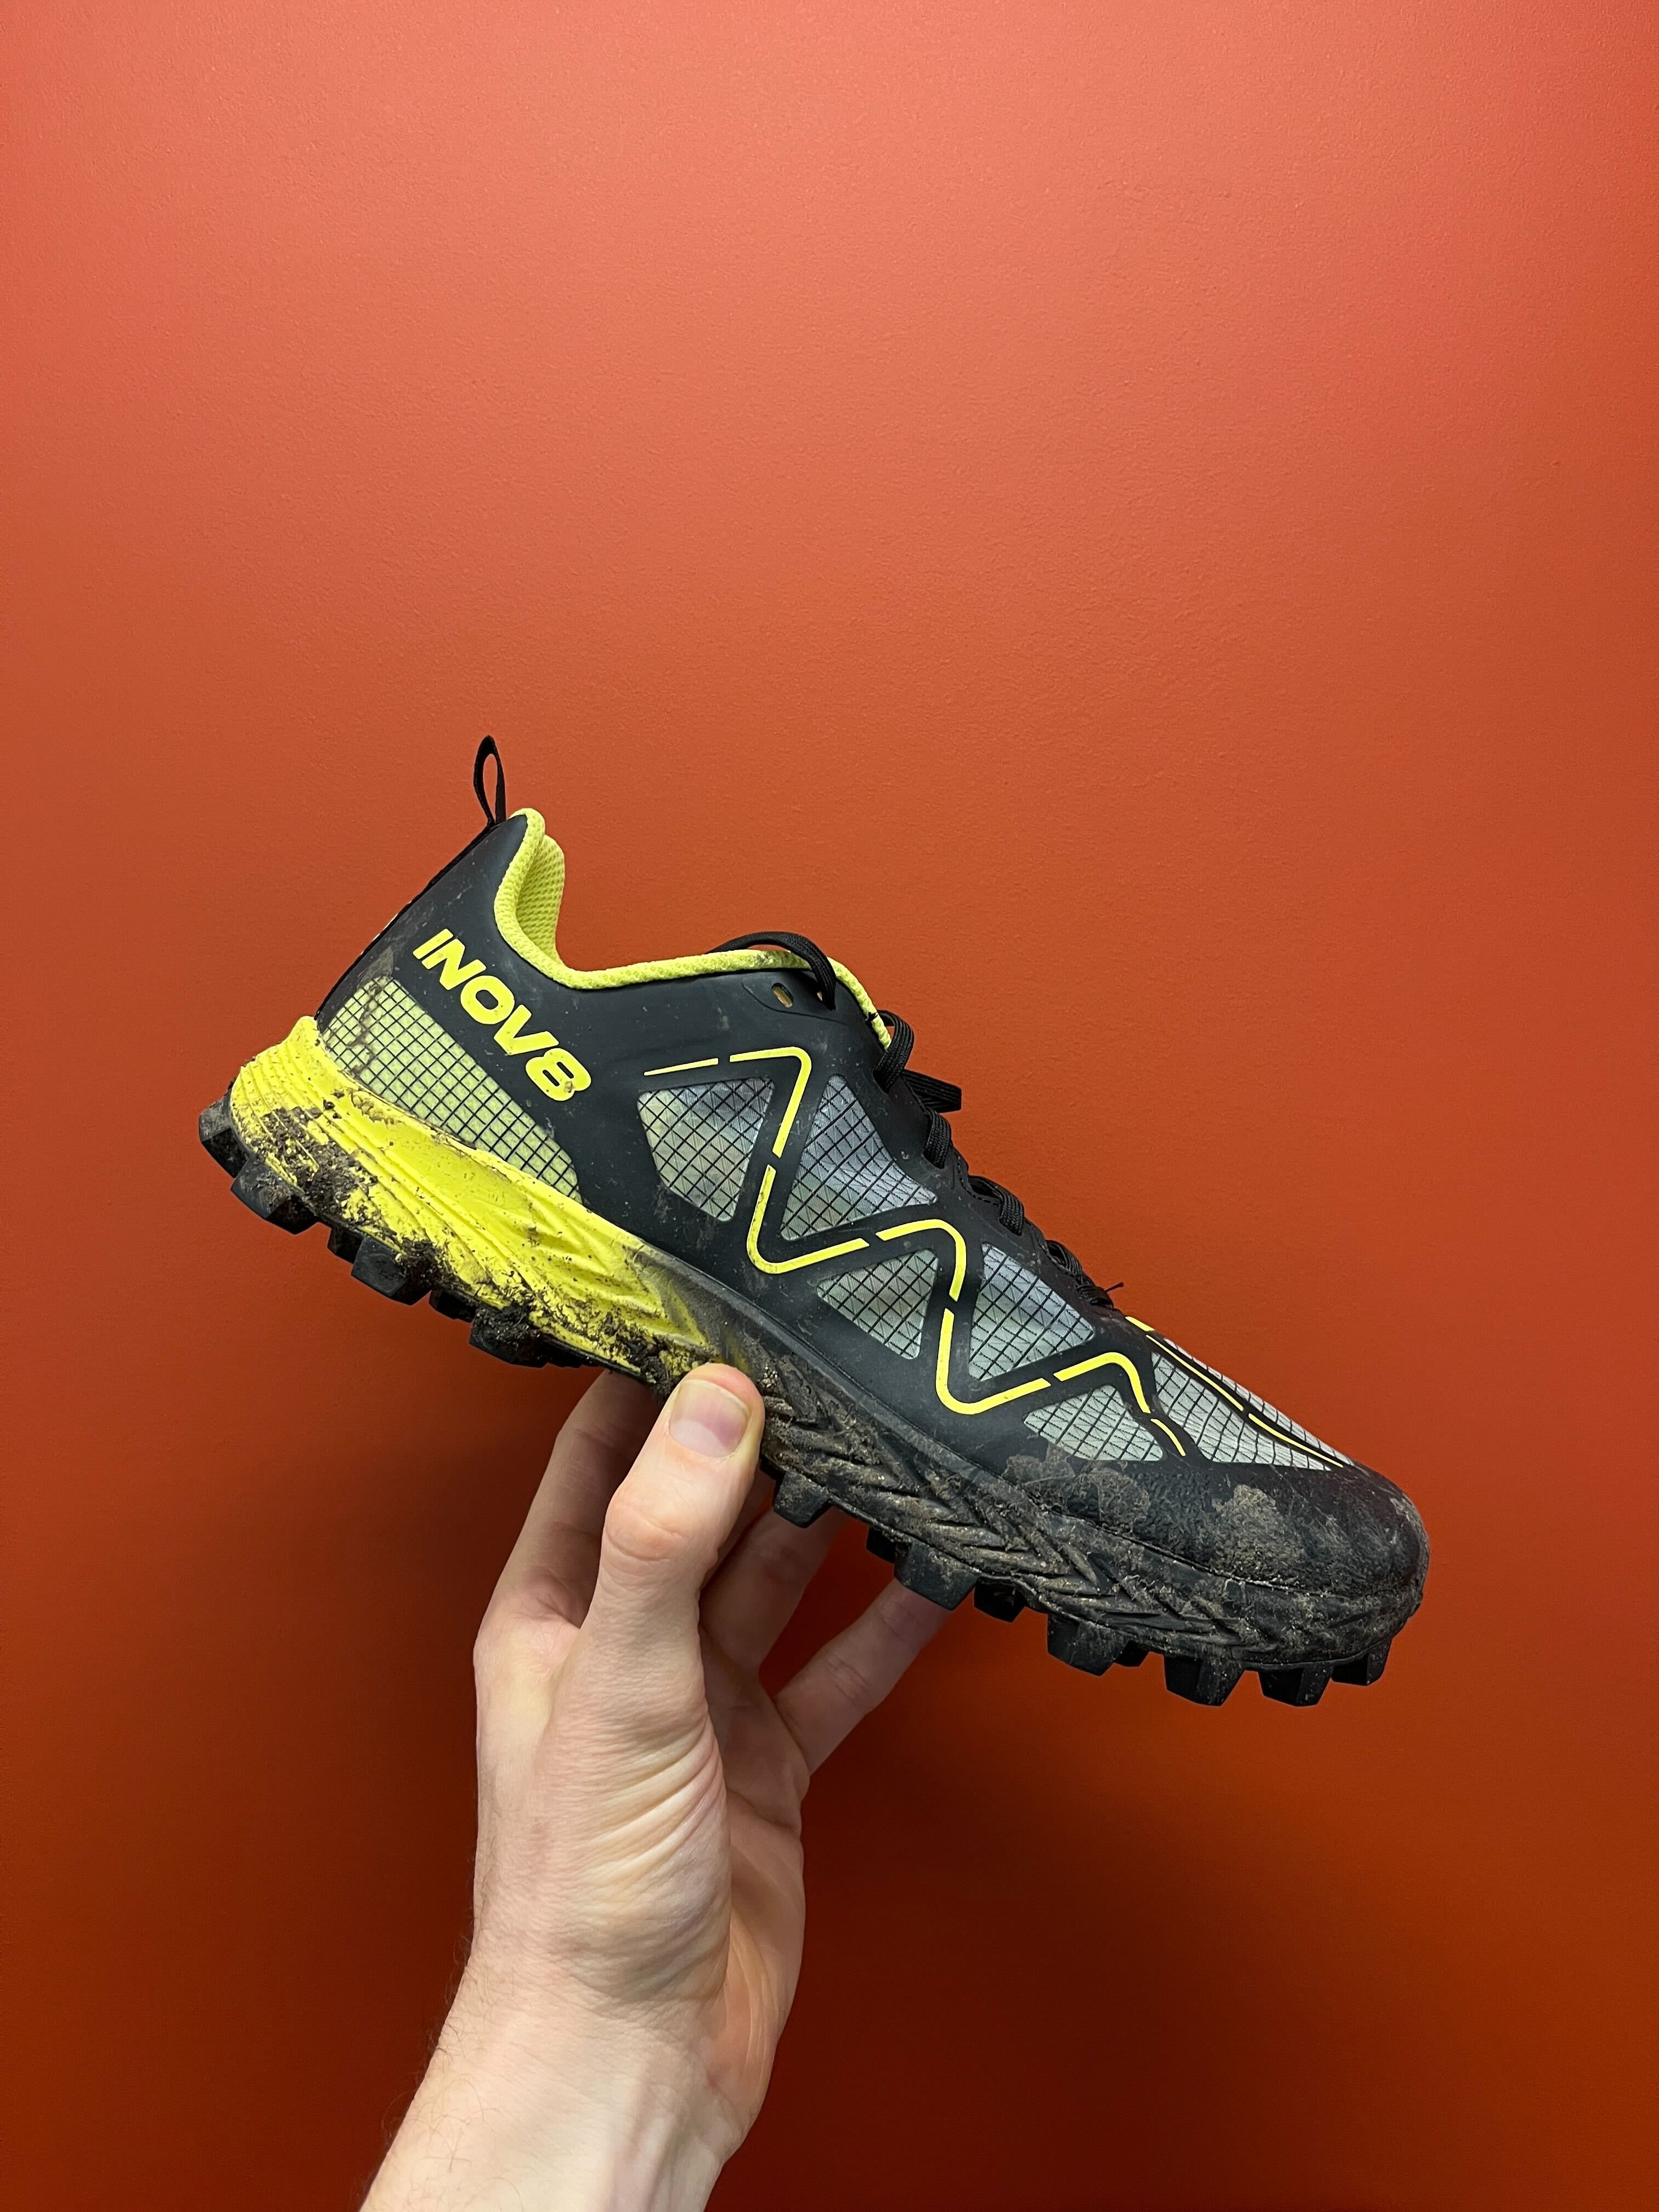 Inov-8 Mudtalon Speed: Tried and tested